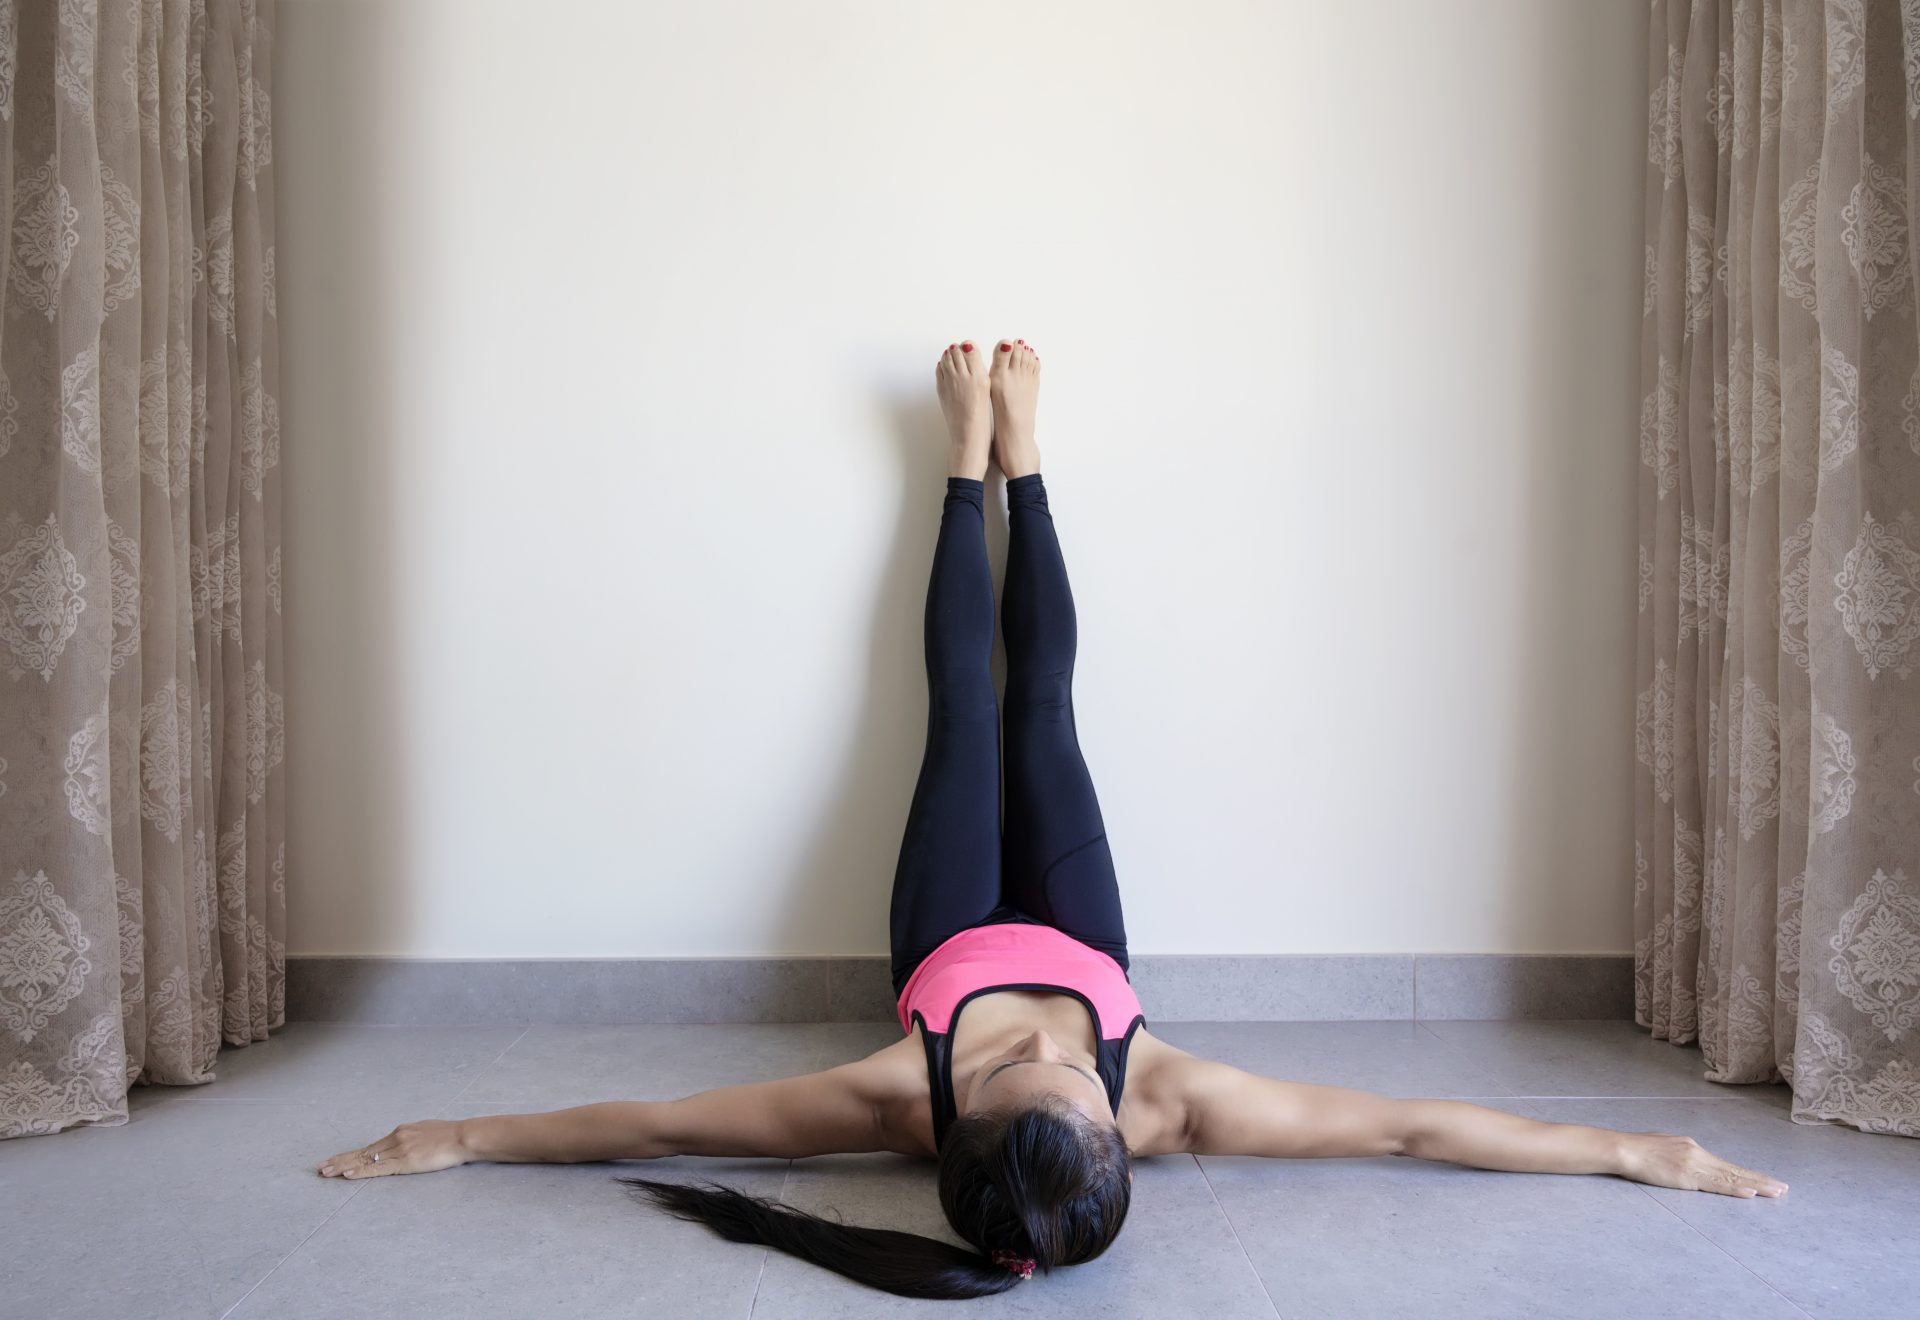 Wall pilates is the new low-impact exercise everyone's trying